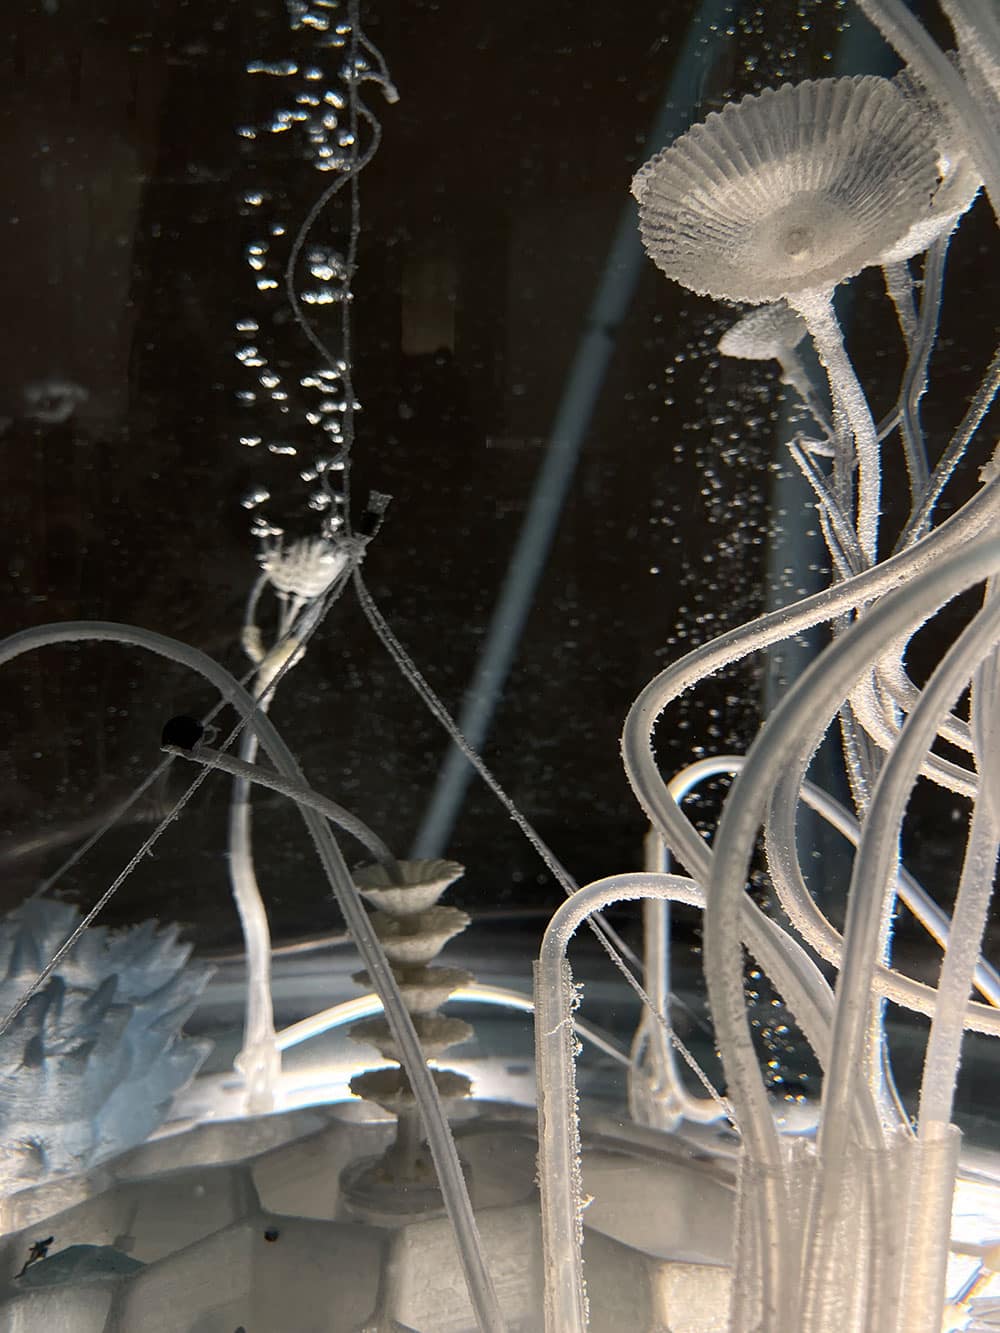 Picture of plastic-eating plants that were developed by Pinar Yoldas. They are planted in water and are white and translucent. They look a bit alien.